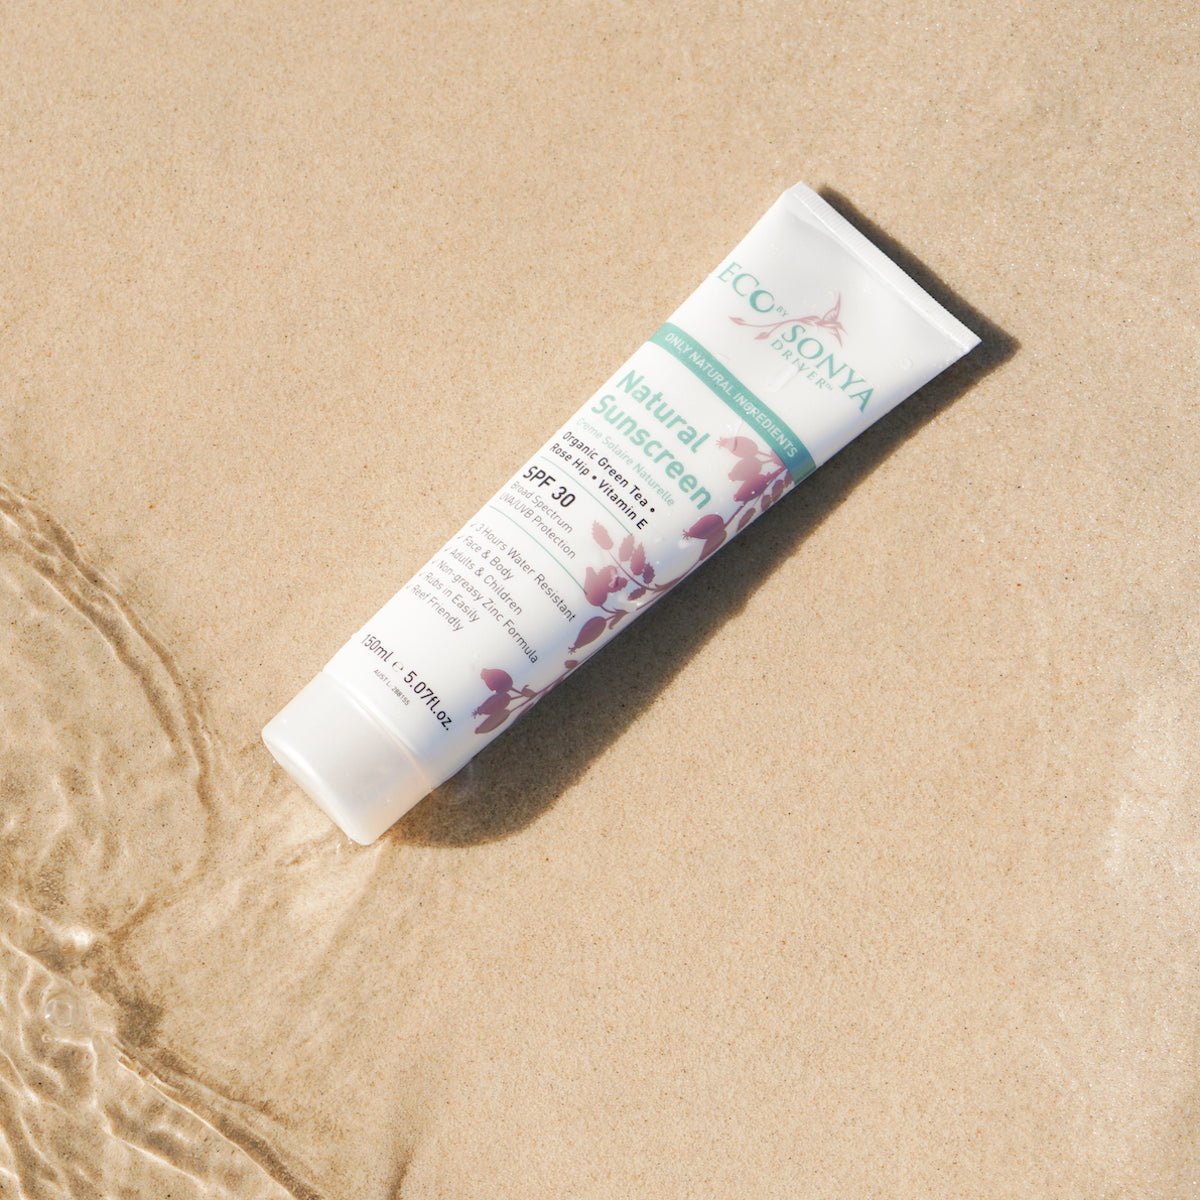 Three Iconic Summer Activities to Pair with Our Natural Rosehip Sunscreen